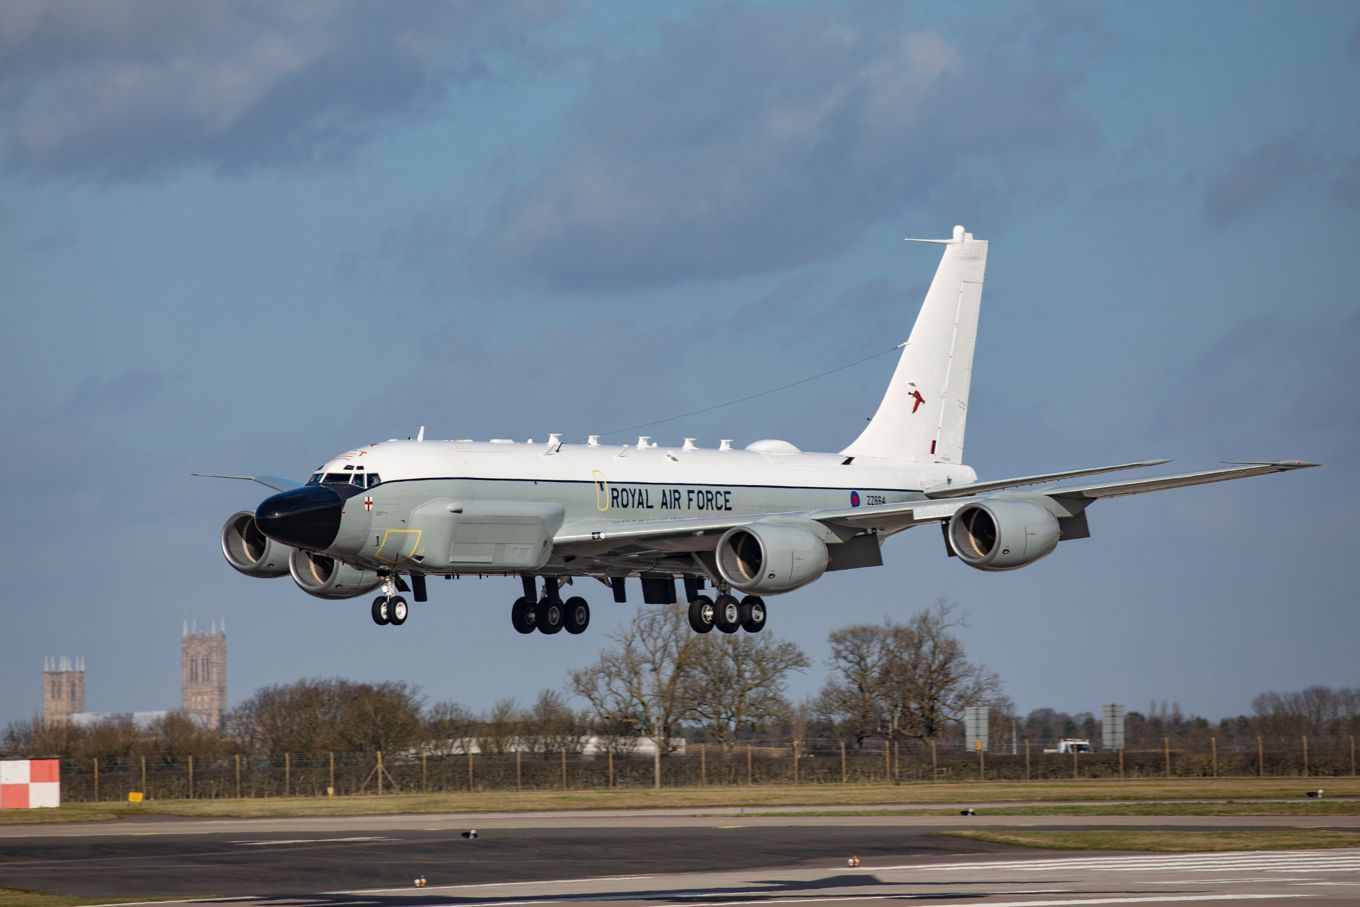 Image shows RAF Rivet Joint aircraft about to land.